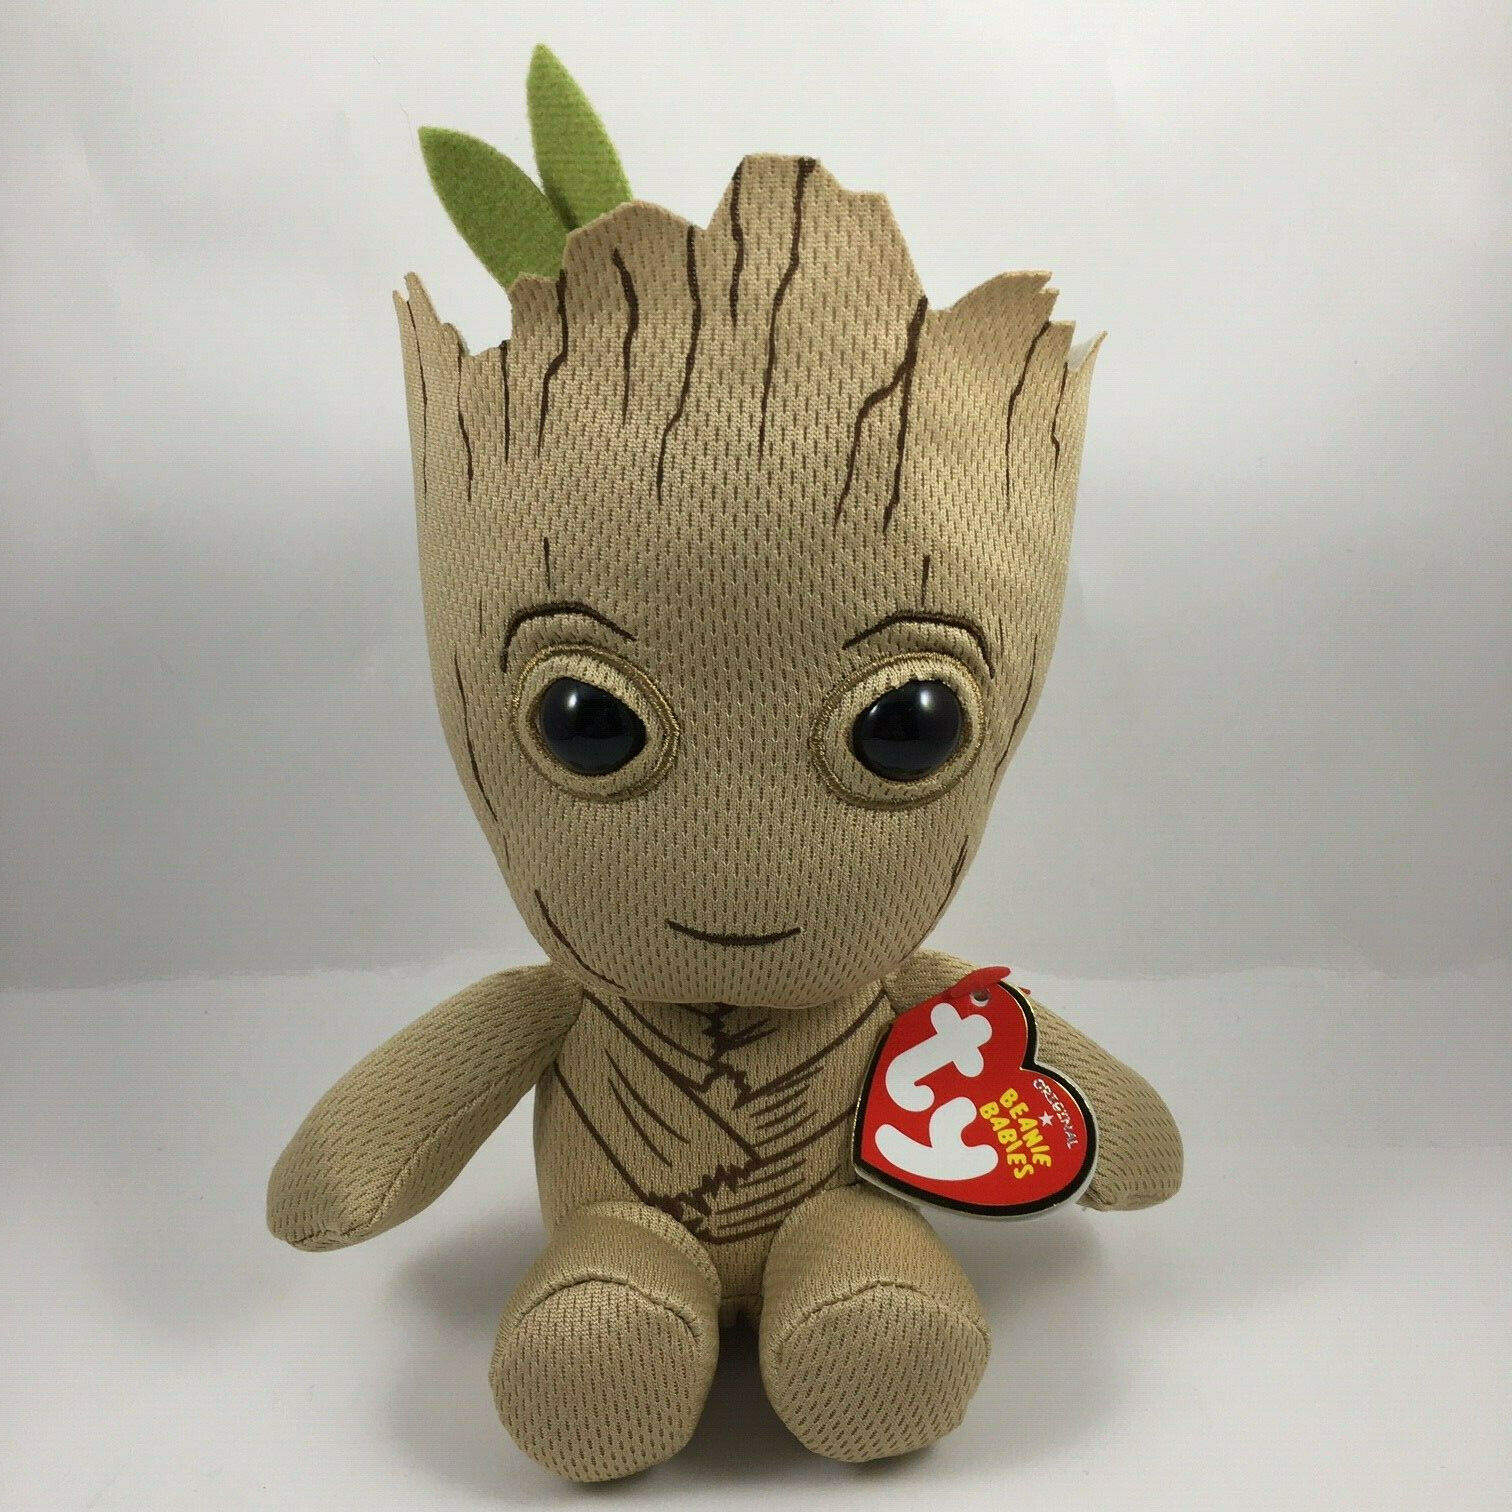 Ty Beanie Baby 6" Groot Marvel Guardians Of The Galaxy Plush W/ Mwmts Heart Tags